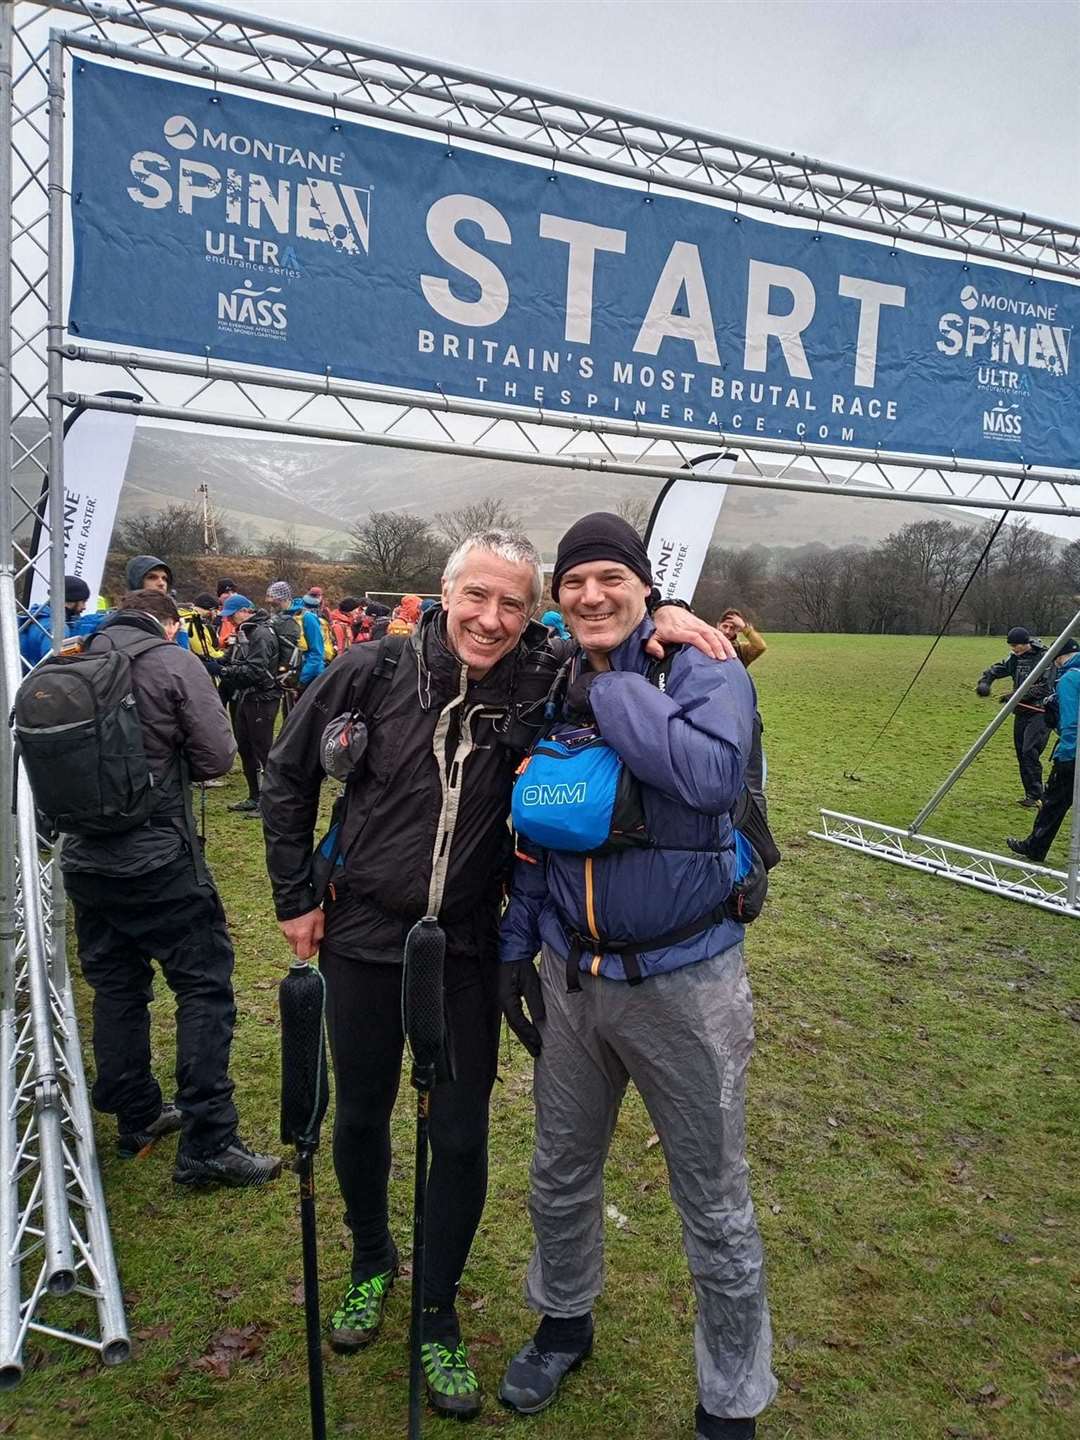 Gary Morrison (right) meets up with Steve Thompson who was one of his fellow race finishers from the inaugural Spine Race.